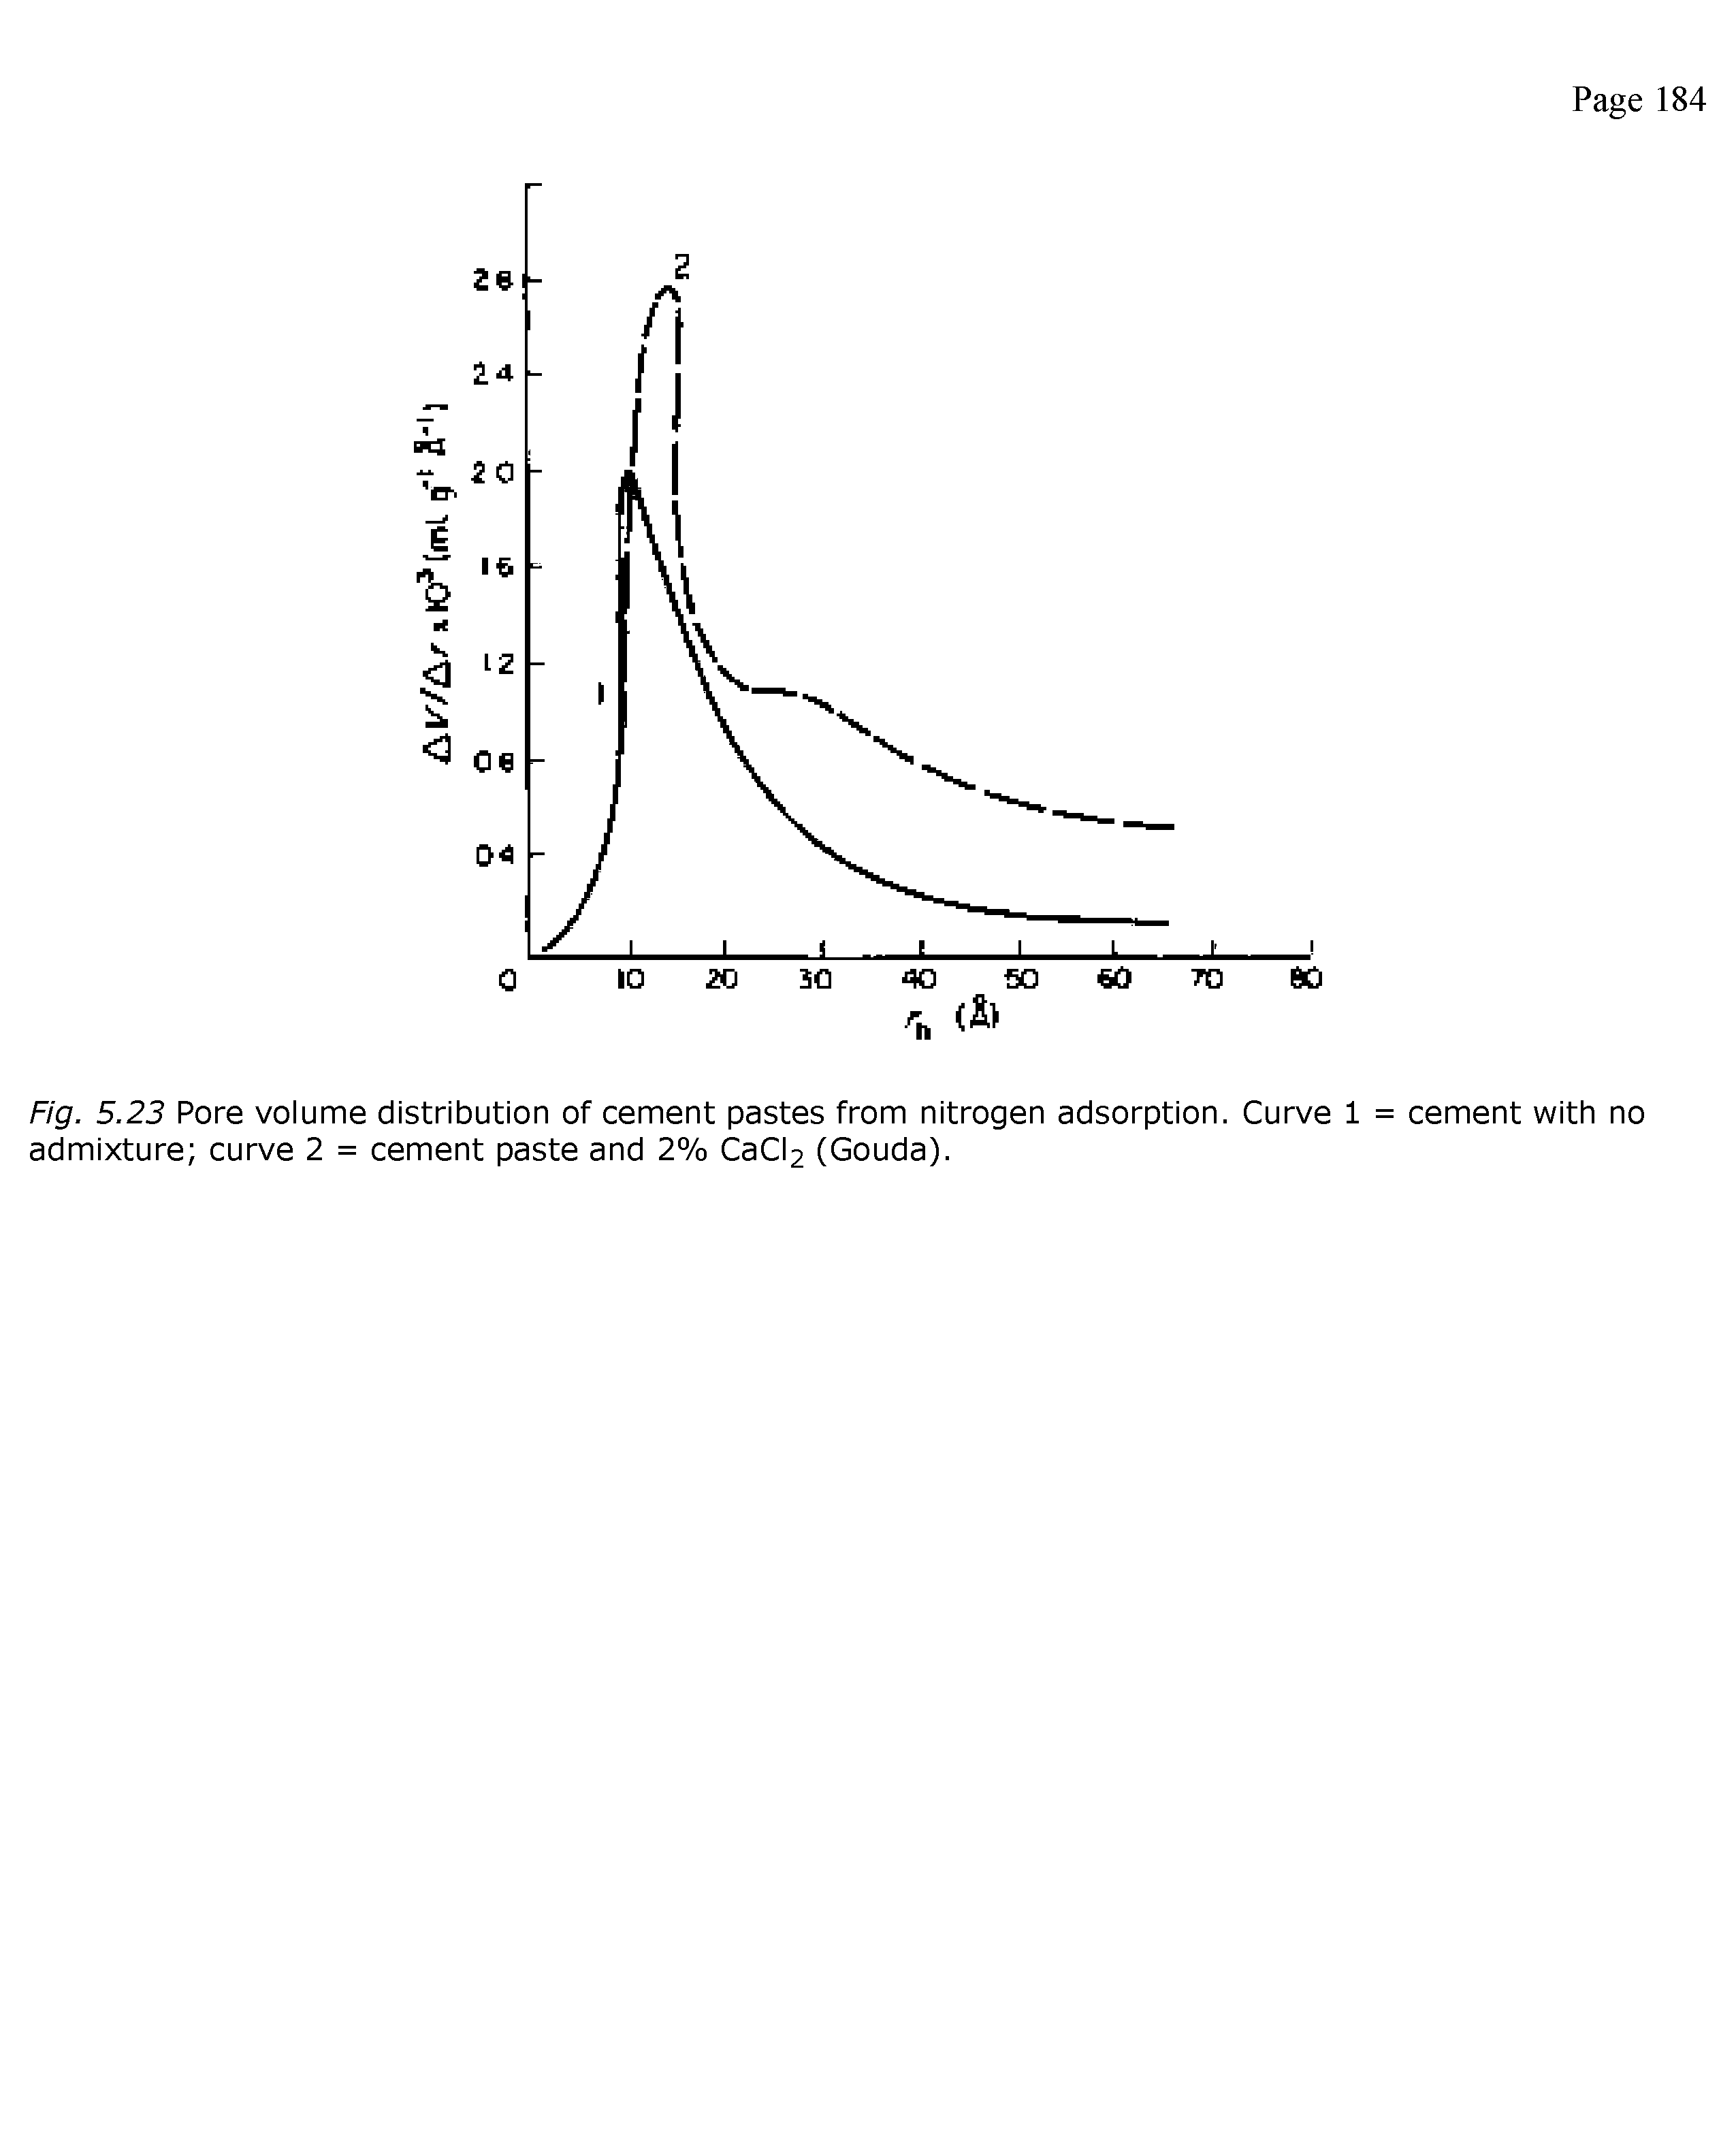 Fig. 5.23 Pore volume distribution of cement pastes from nitrogen adsorption. Curve 1 = cement with no admixture curve 2 = cement paste and 2% CaCl2 (Gouda).